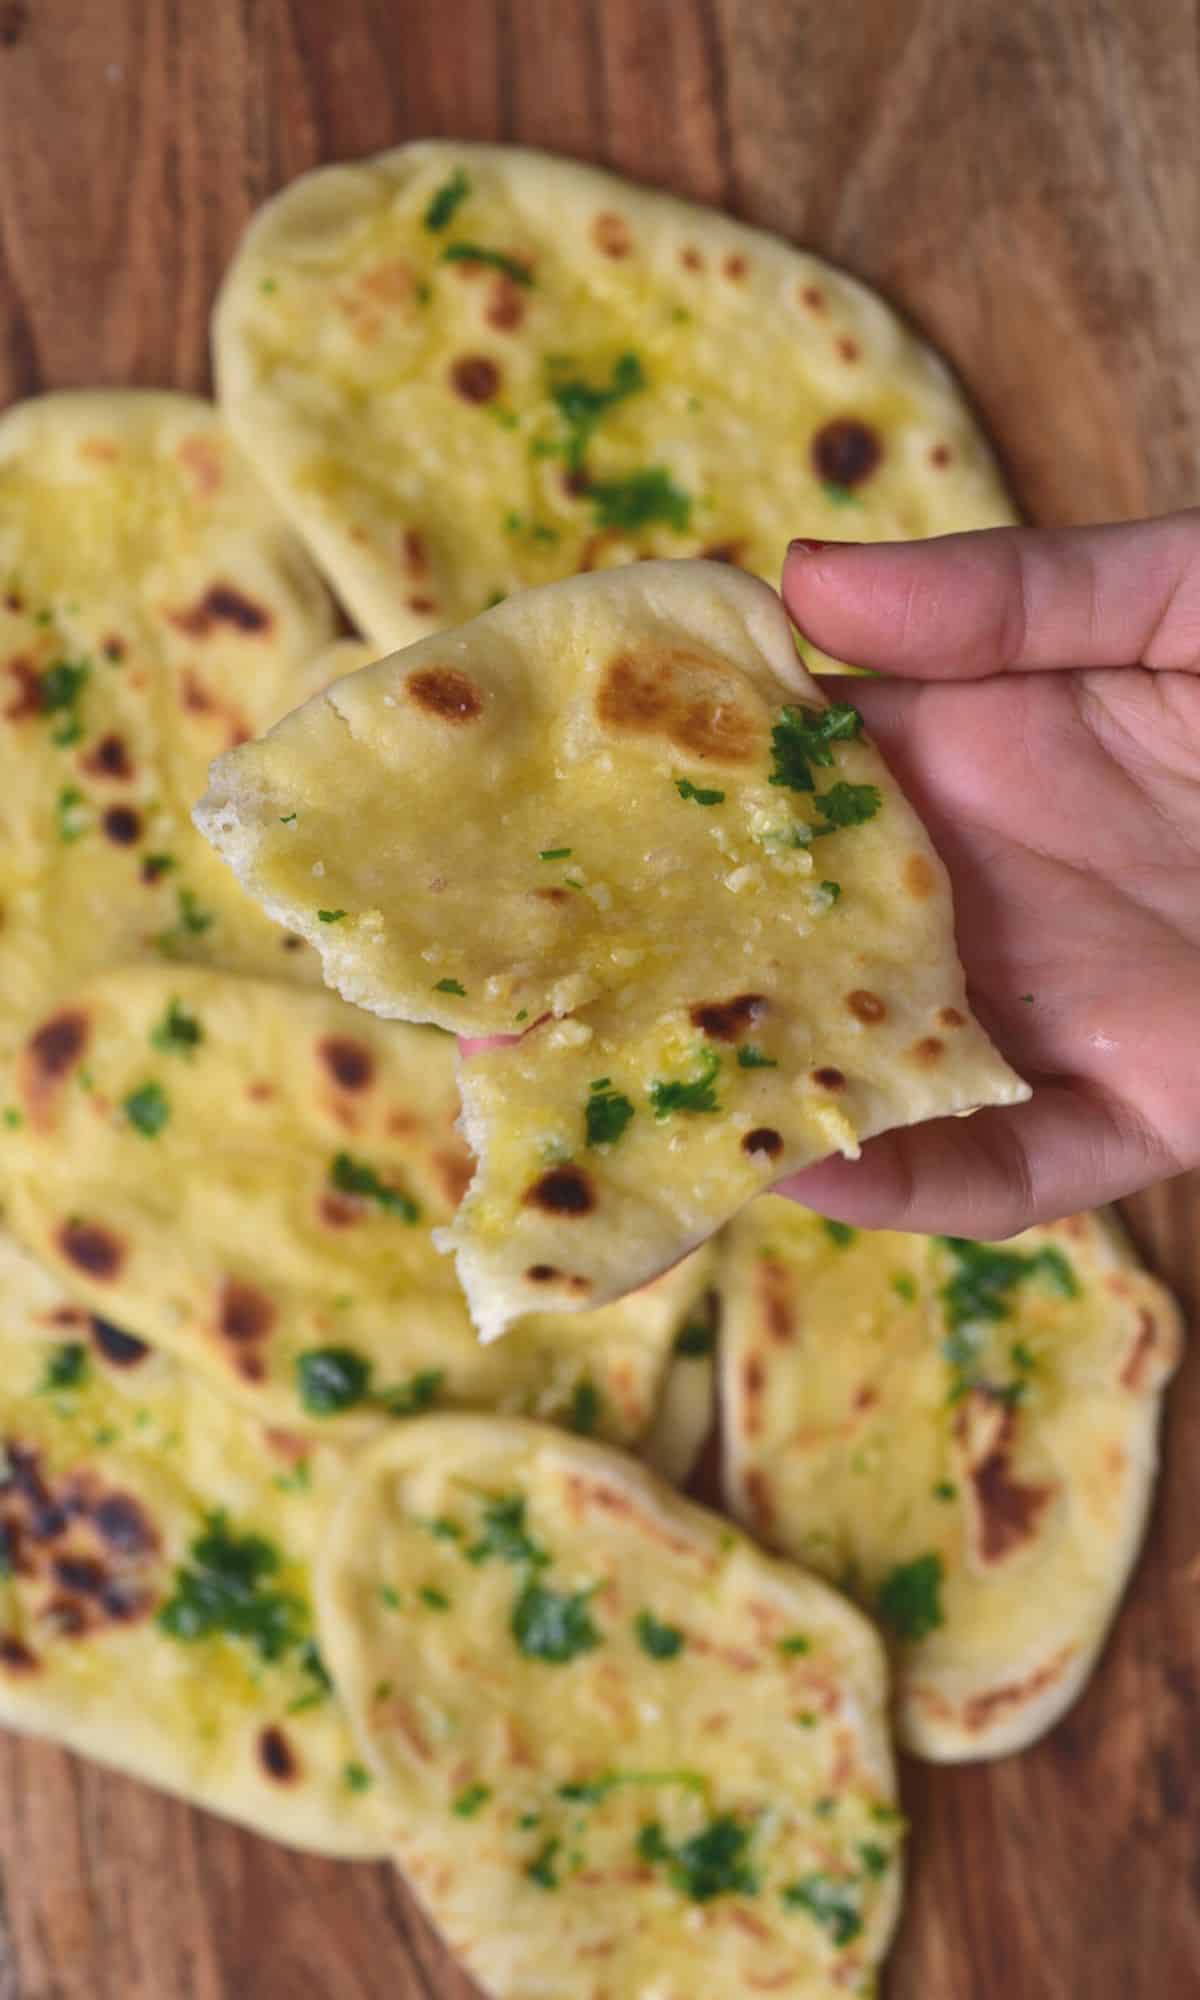 A hand holding a naan bread